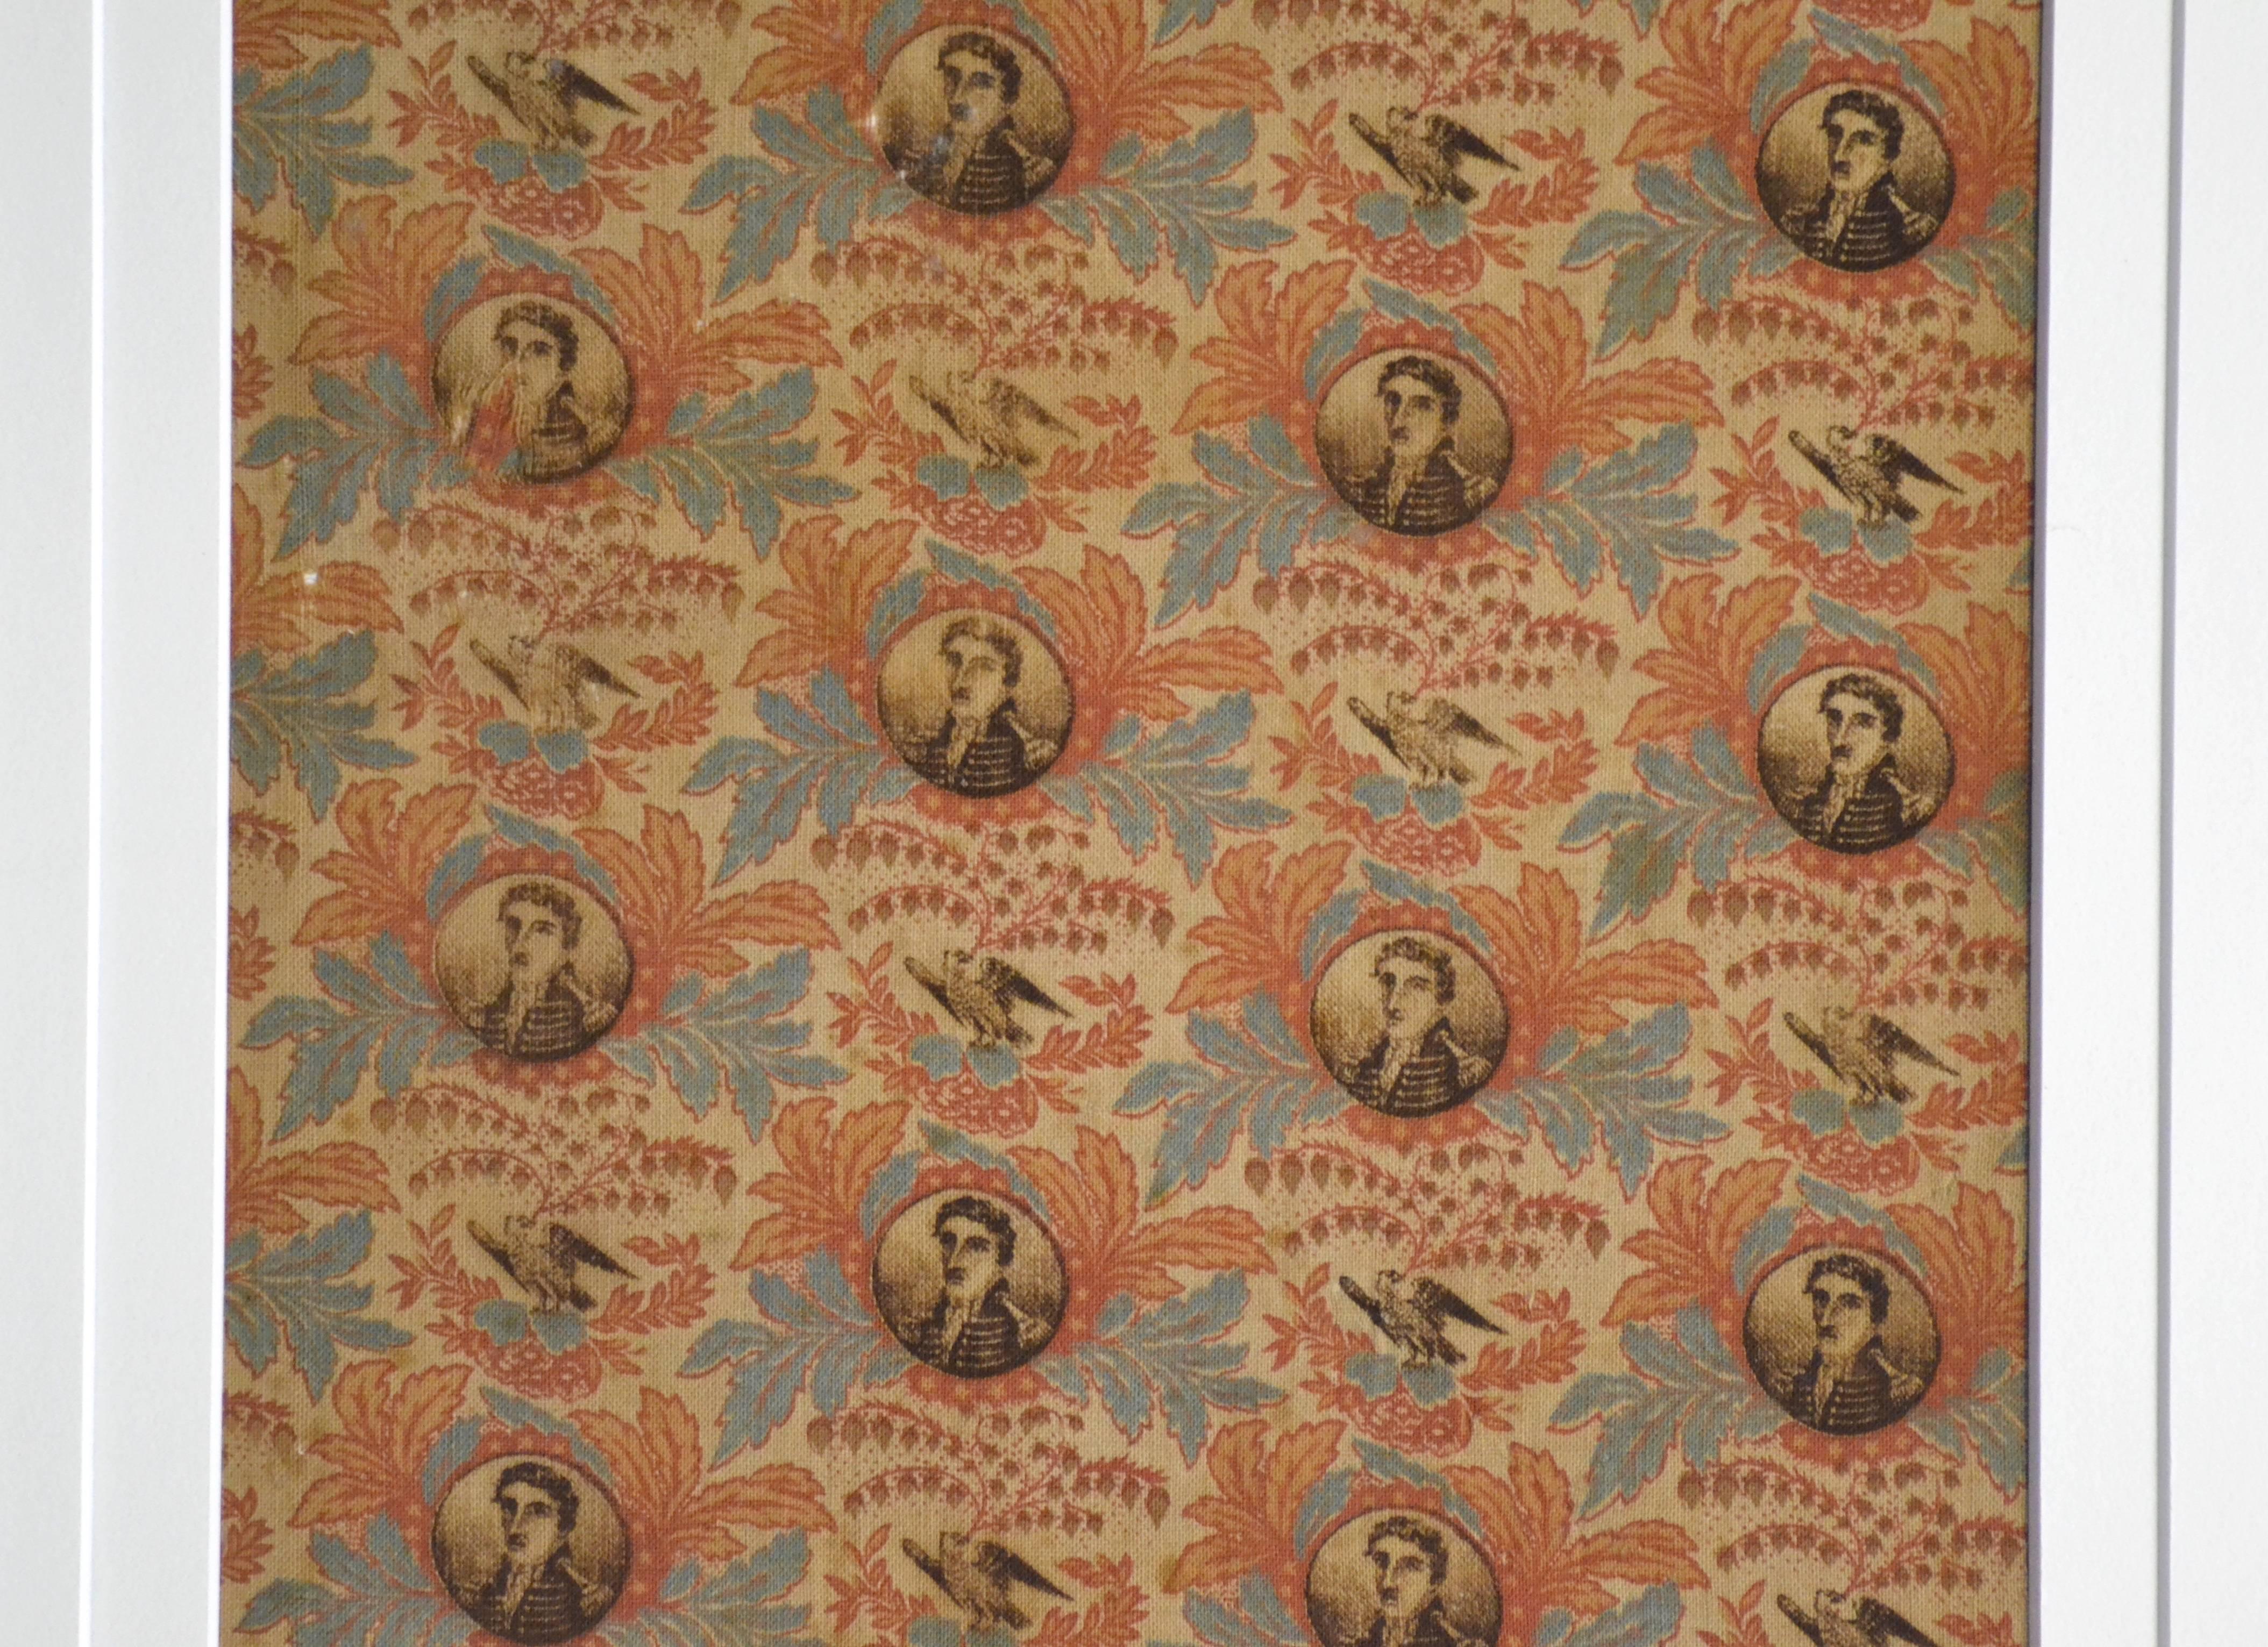 Rare 1824 textile; The Nations Guest, Lafayette. Pictured in the bible of antique Americana textiles "Threads of History" and flags on page 76 #65. The original example was 29" x 36" This is a remnant of an original 29 x361824